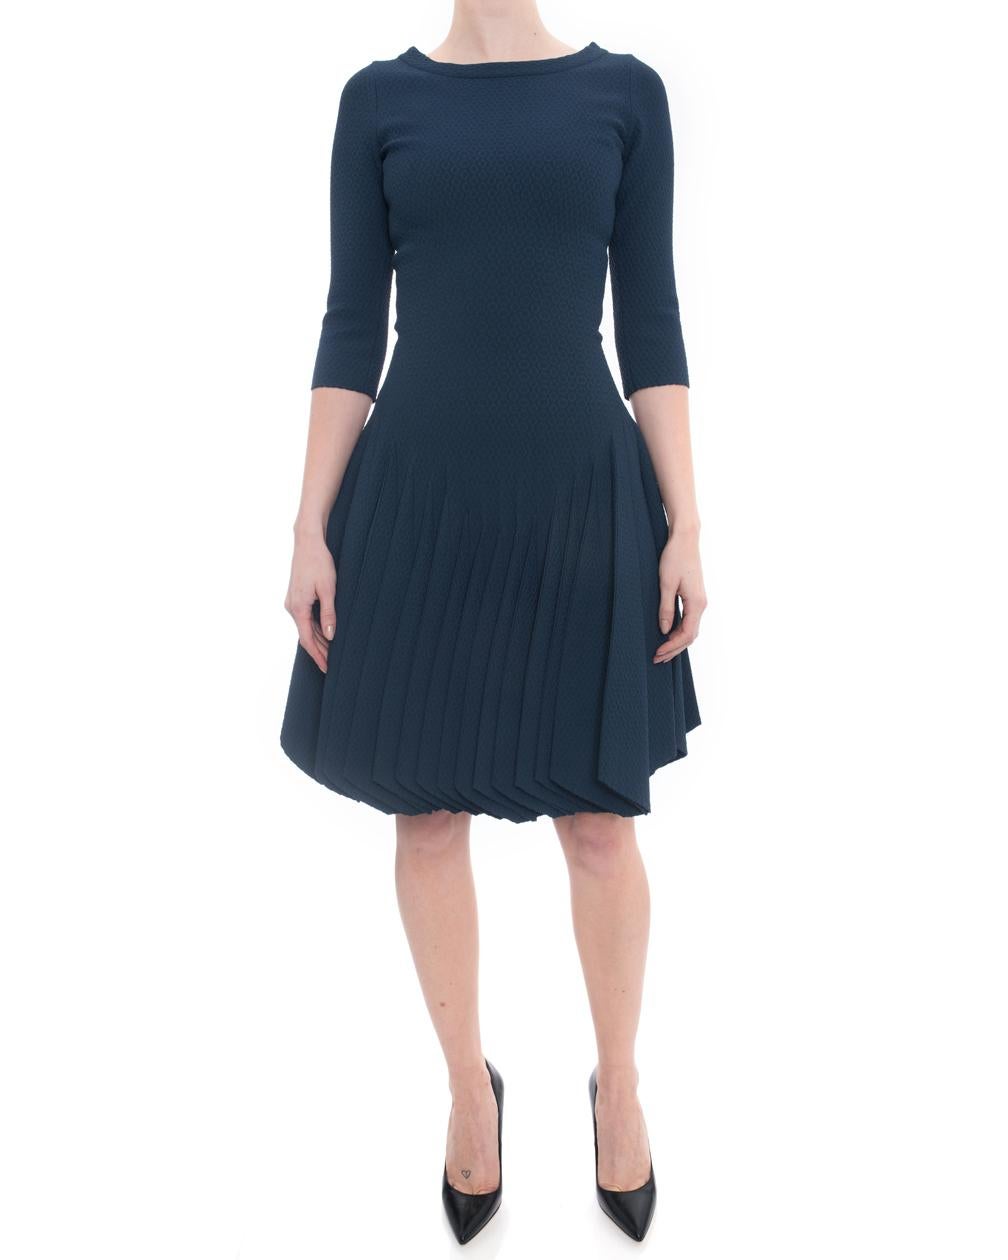 Alaia Prussian Blue Stretch Knit Fit and Flare Dress.  New with original price tag of $5795 from The Room.  Dark Prussian blue, boat neck design,  ¾ length sleeve, centre back zipper, flared skirt.  Marked size FR 38 (USA 6 but best for 4).  Please